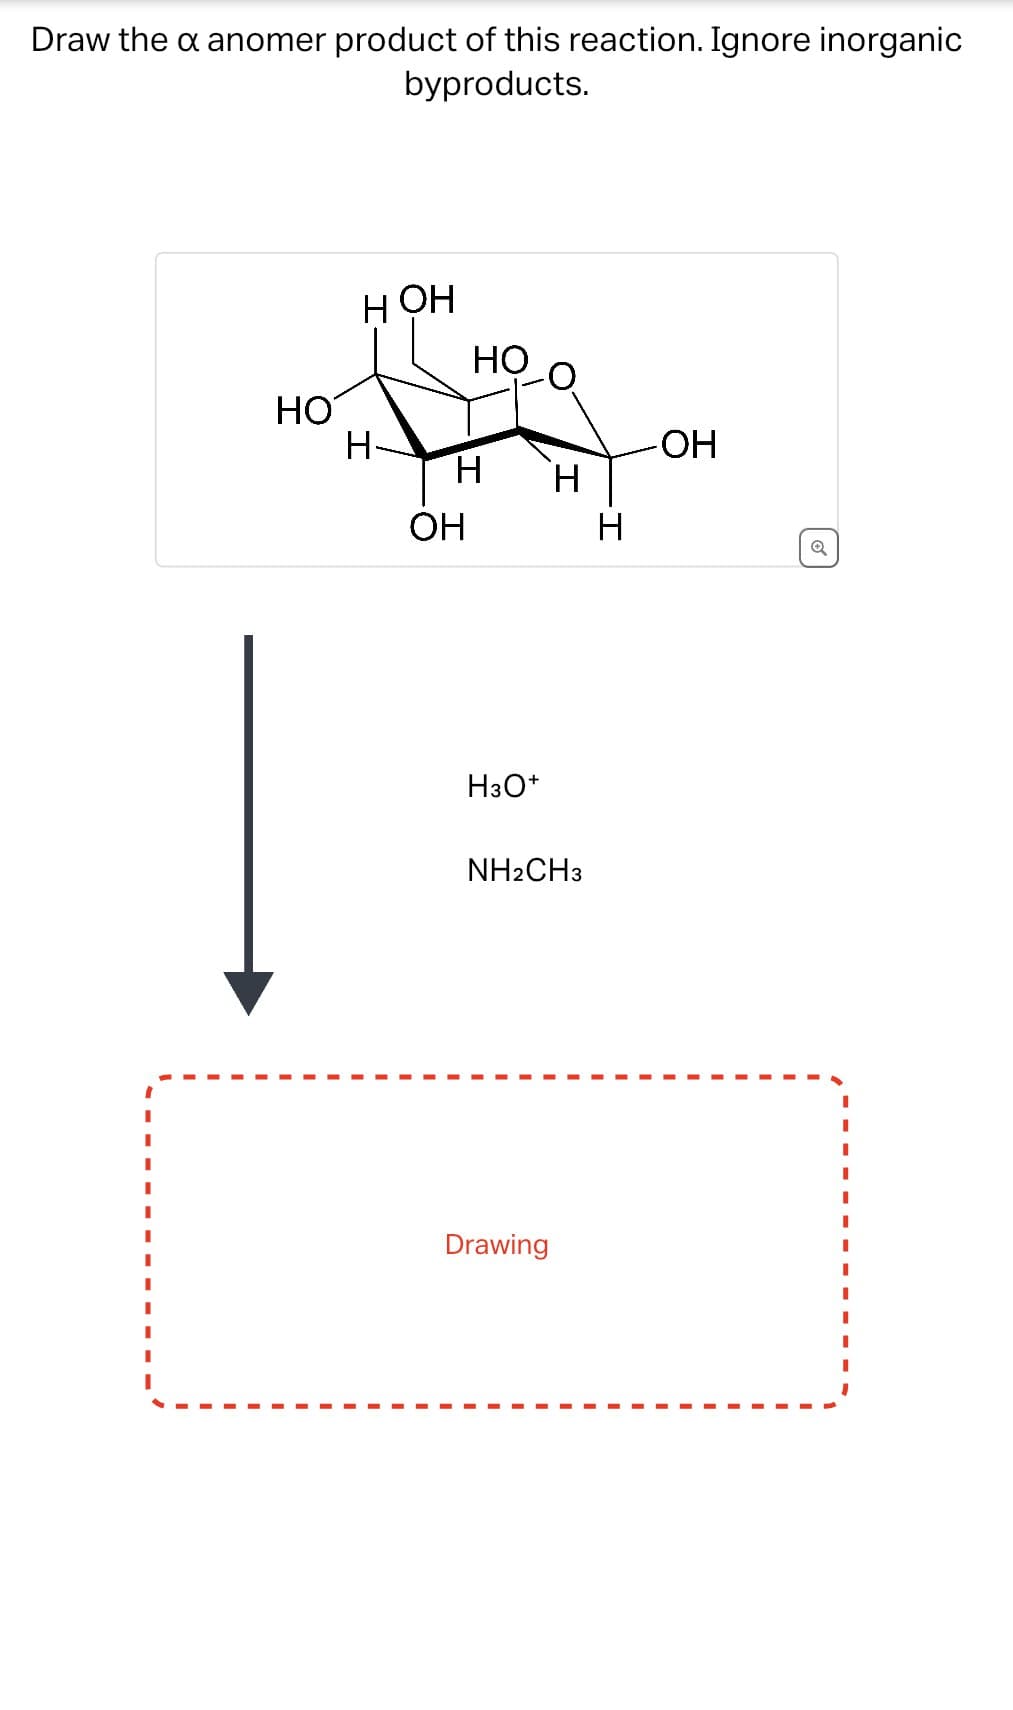 Draw the x anomer product of this reaction. Ignore inorganic
byproducts.
HOH
HỌ
HO
H-
-OH
H
OH
H
H3O+
NH2CH3
Drawing
Q